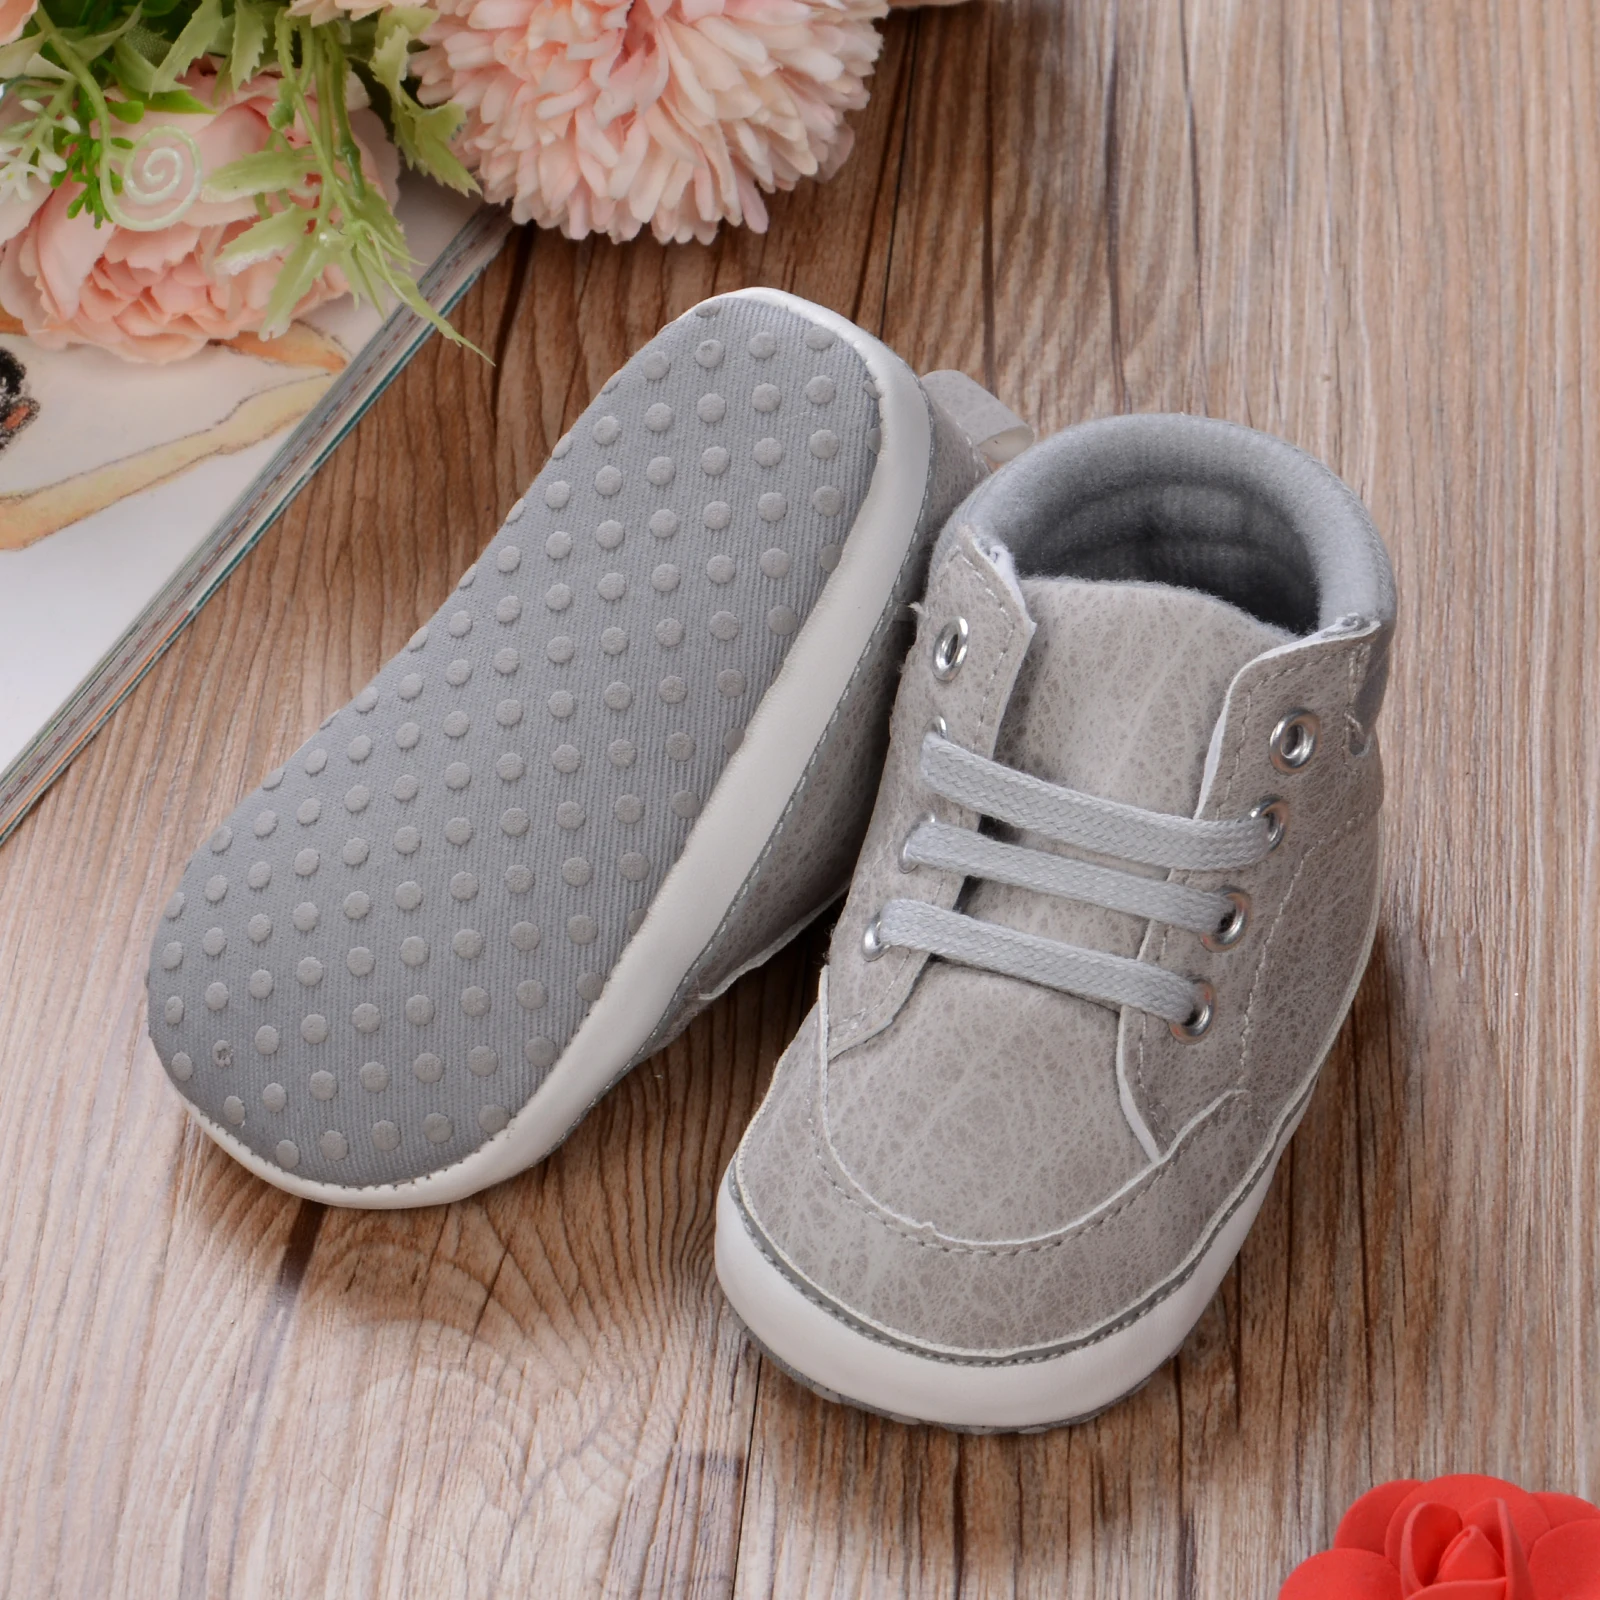 

Brand New Infant Baby Girl Shoes Newborn Soft Sole Sneaker Cotton Crib Shoes Sport Casual Warm First Walkers For 0-18month